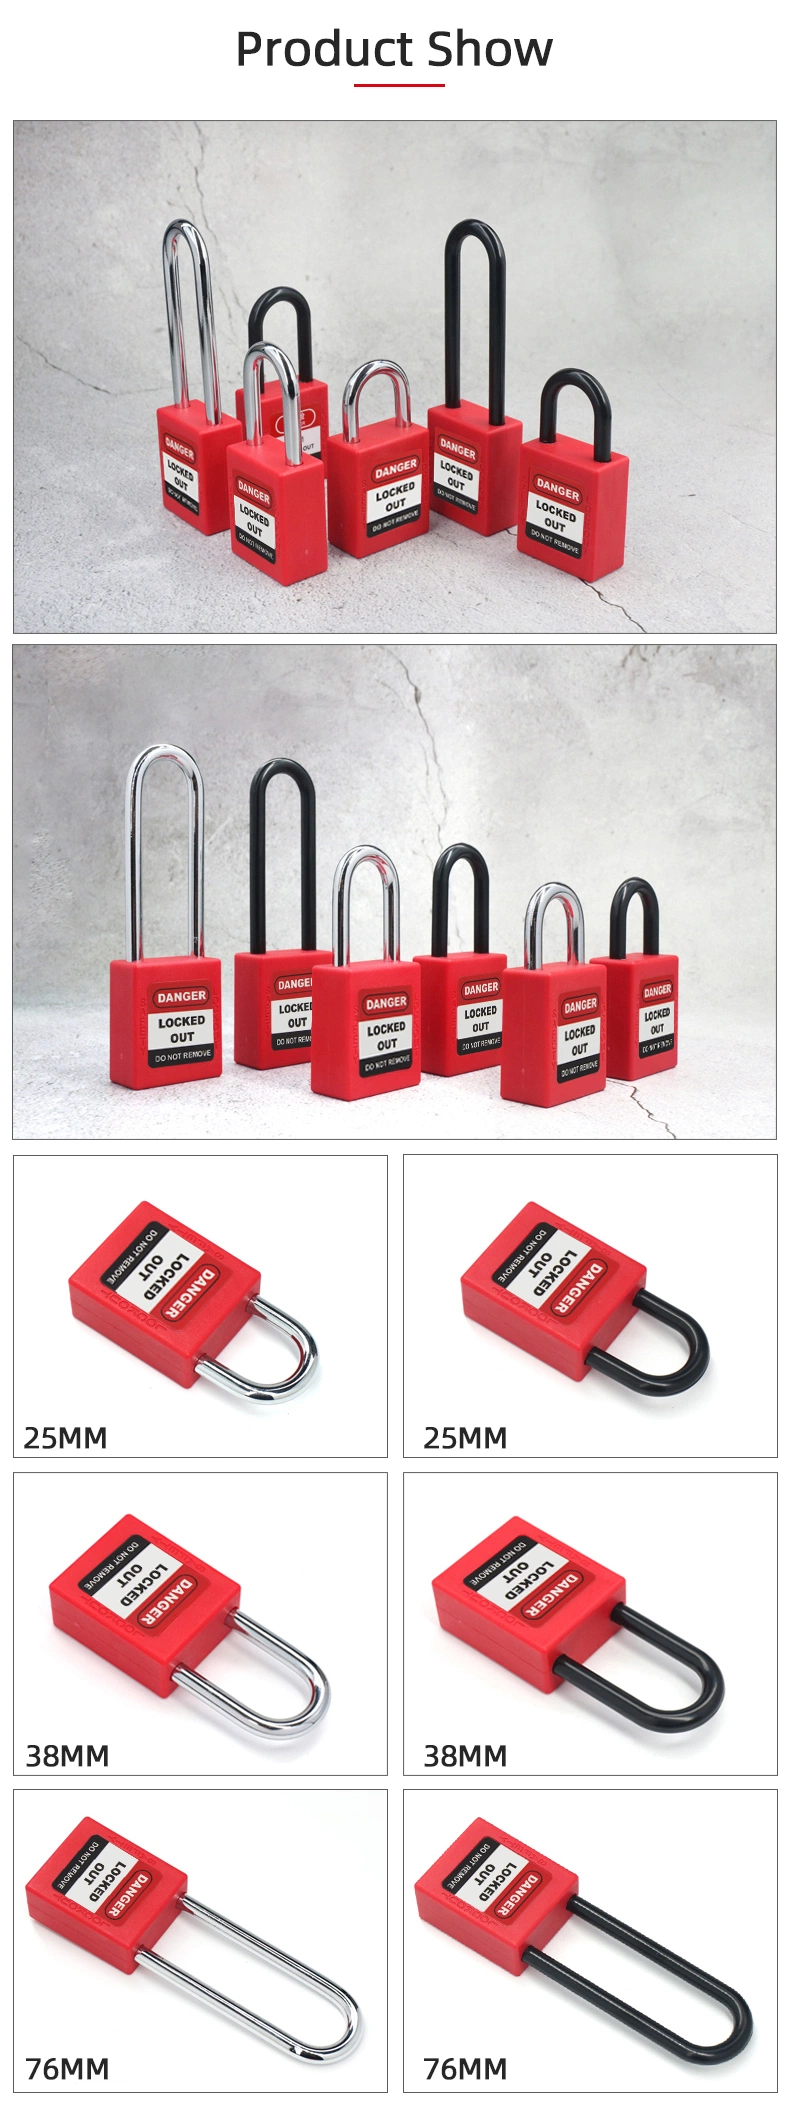 Mini Safety Cable Lockout Device with Stainless Steel Cable for Industrial Equipment Energy Locked